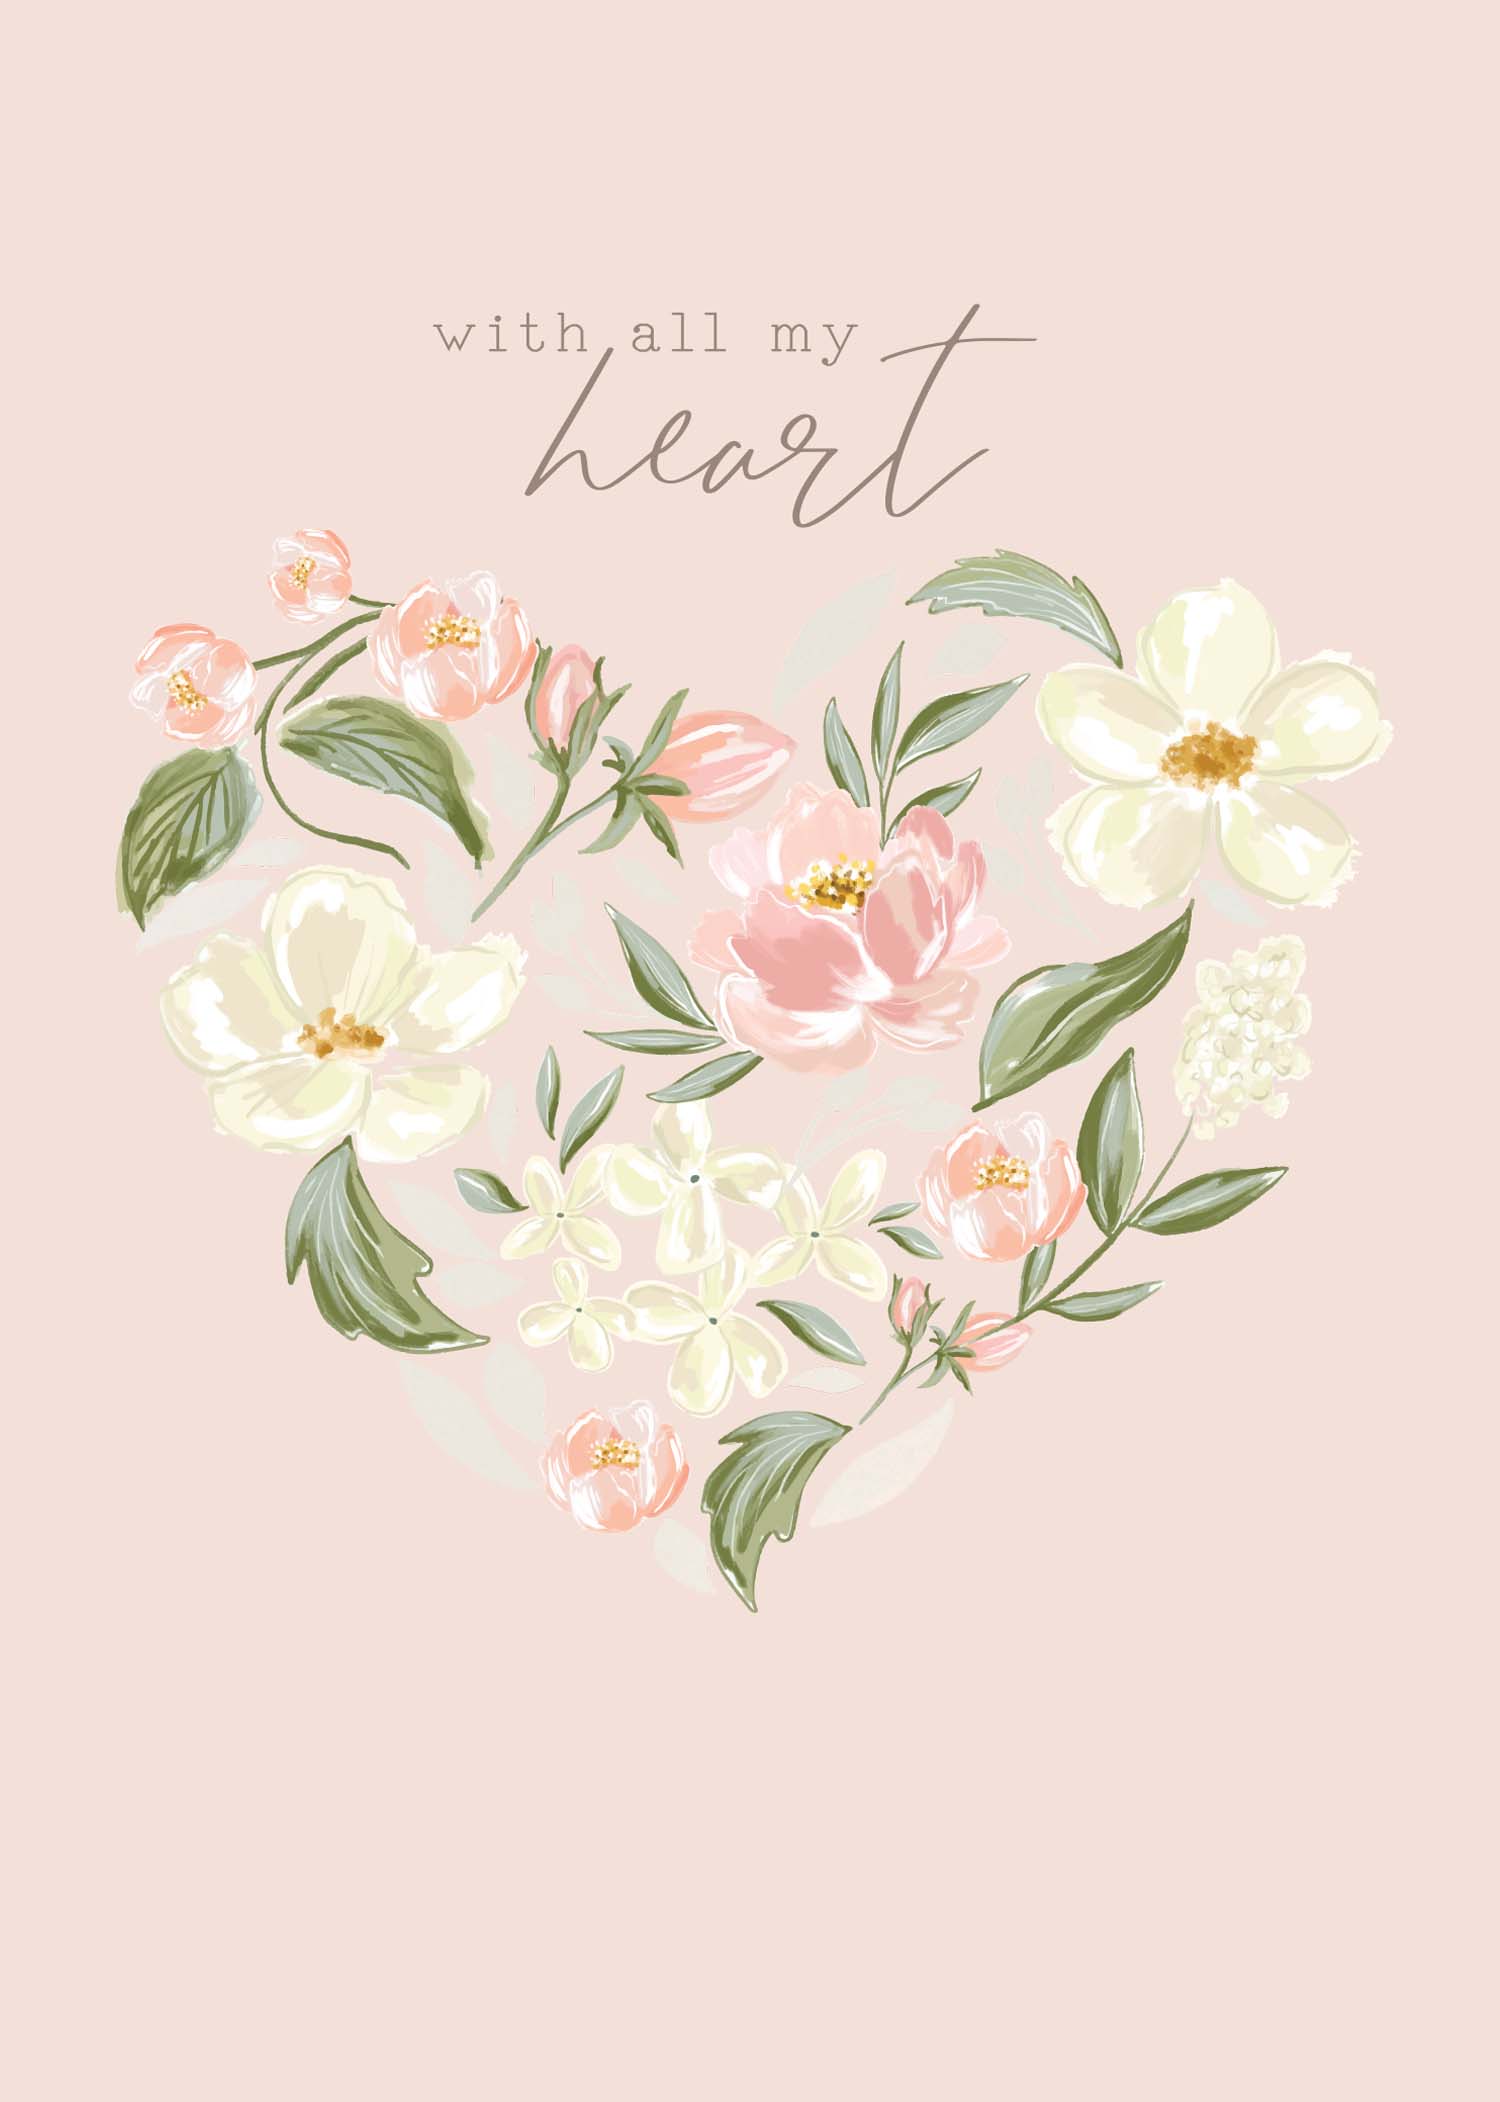 Greeting Card Evergreen - Floral Heart